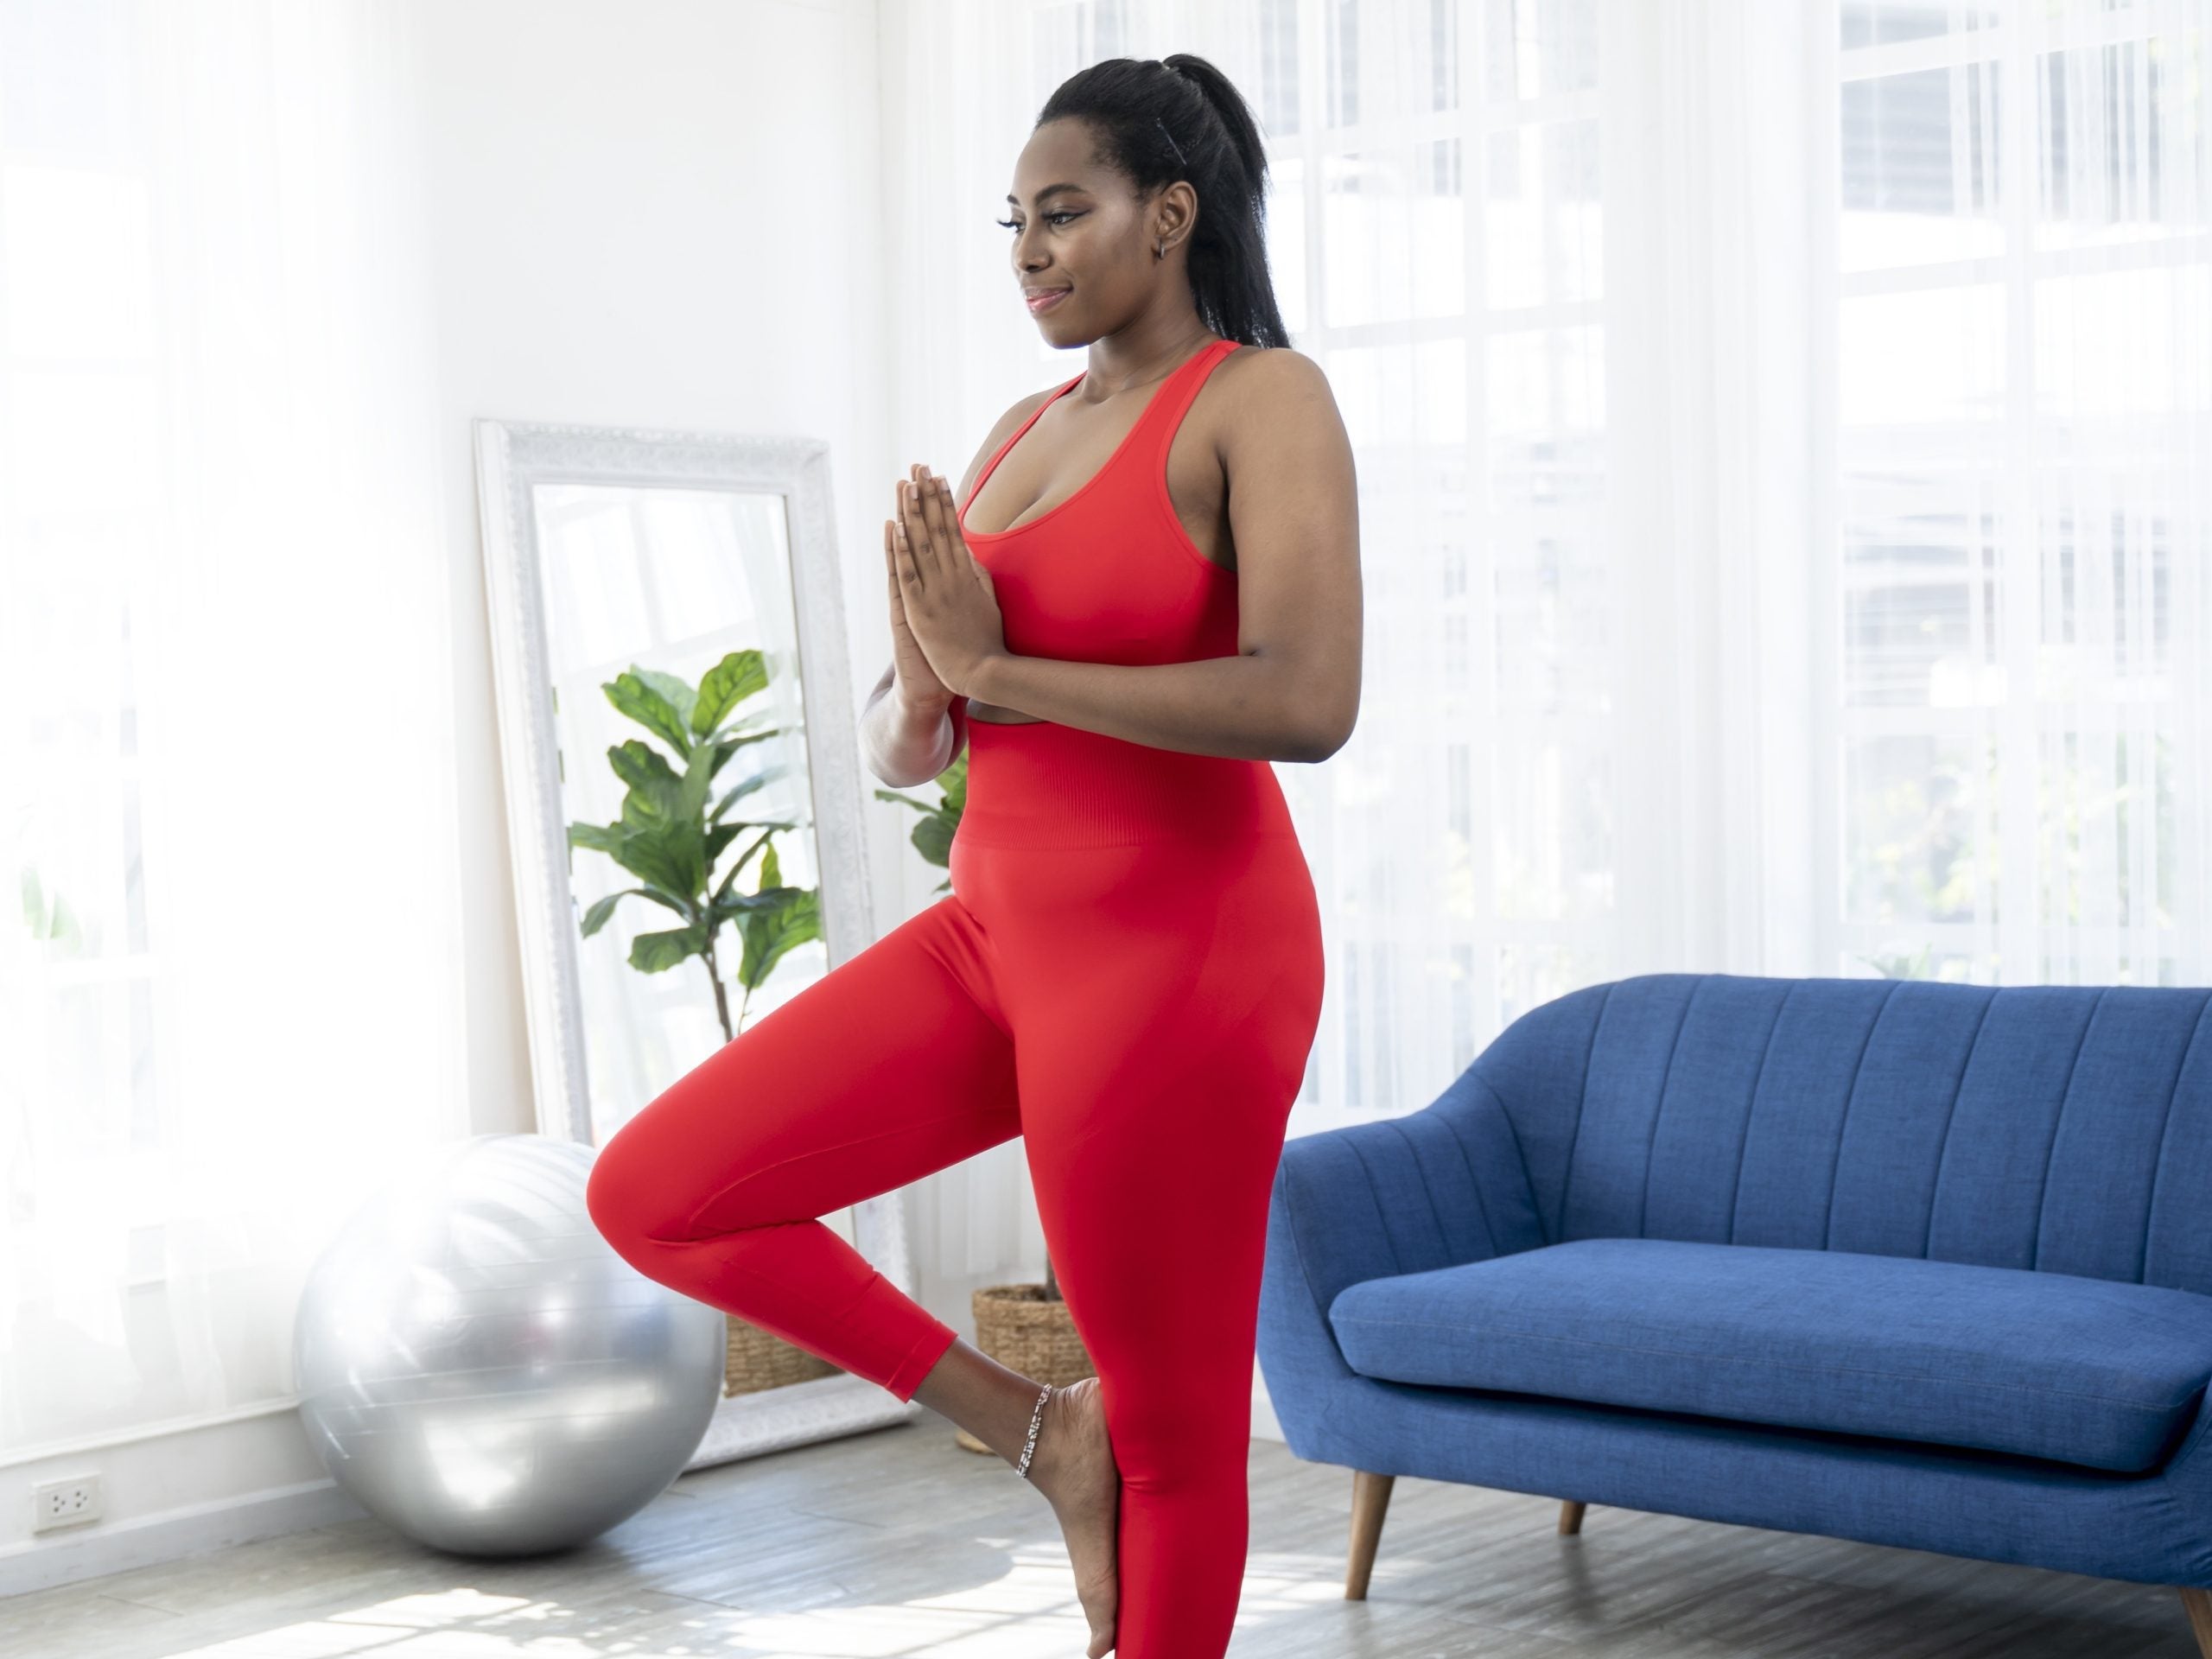 6 Black Women Fitness Influencers To Guide Your Fitness Journey At Home